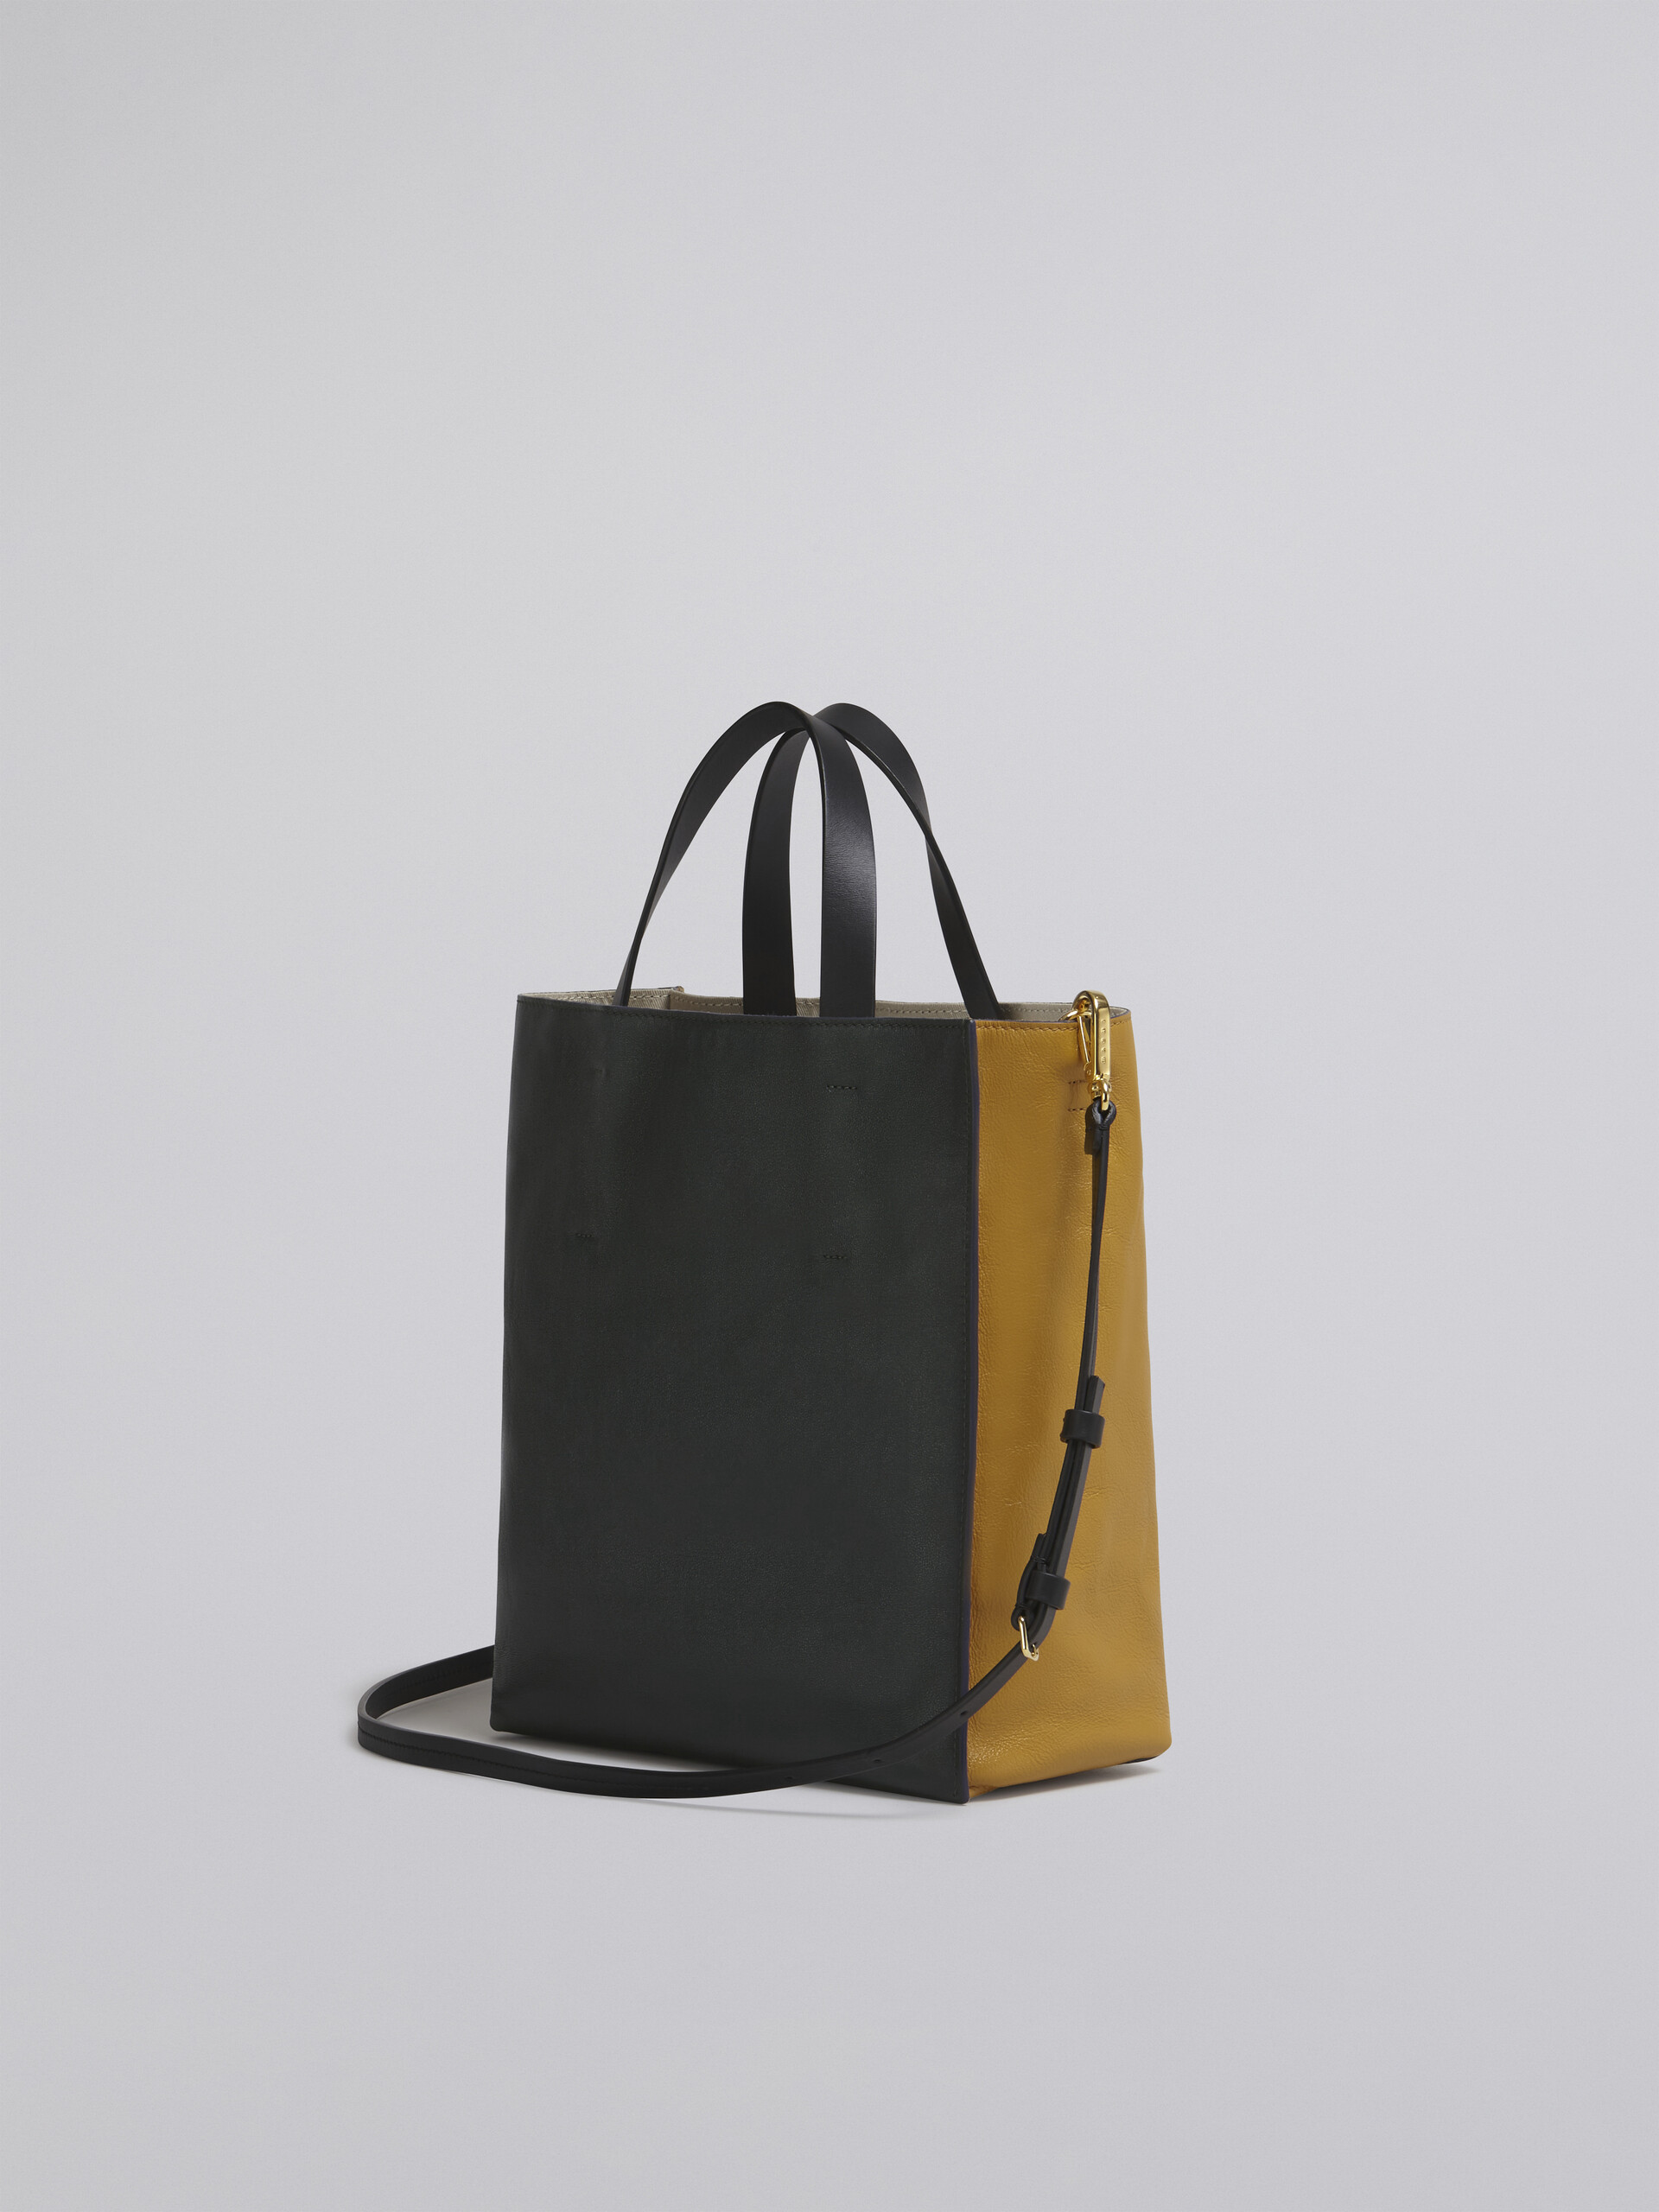 MUSEO SOFT small bag in yellow and green leather - Shopping Bags - Image 3